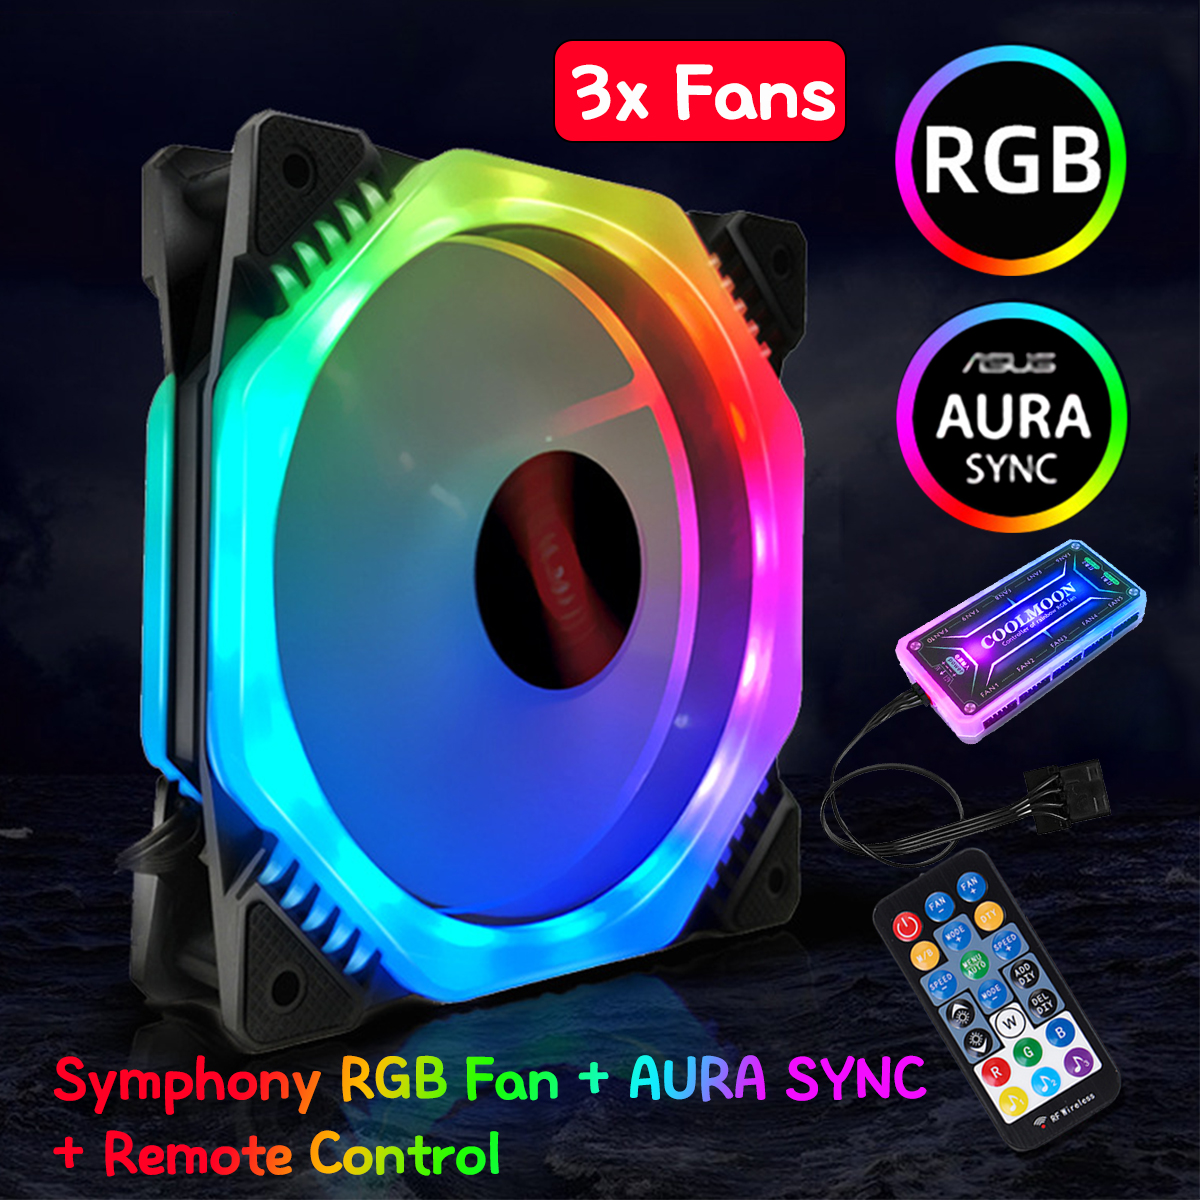 C47346-RGB-PC-Cooling-Fan-1400-RPM-42W-RGB-Symphony-cooling-fan-With-the-Remote-Control-1707240-6